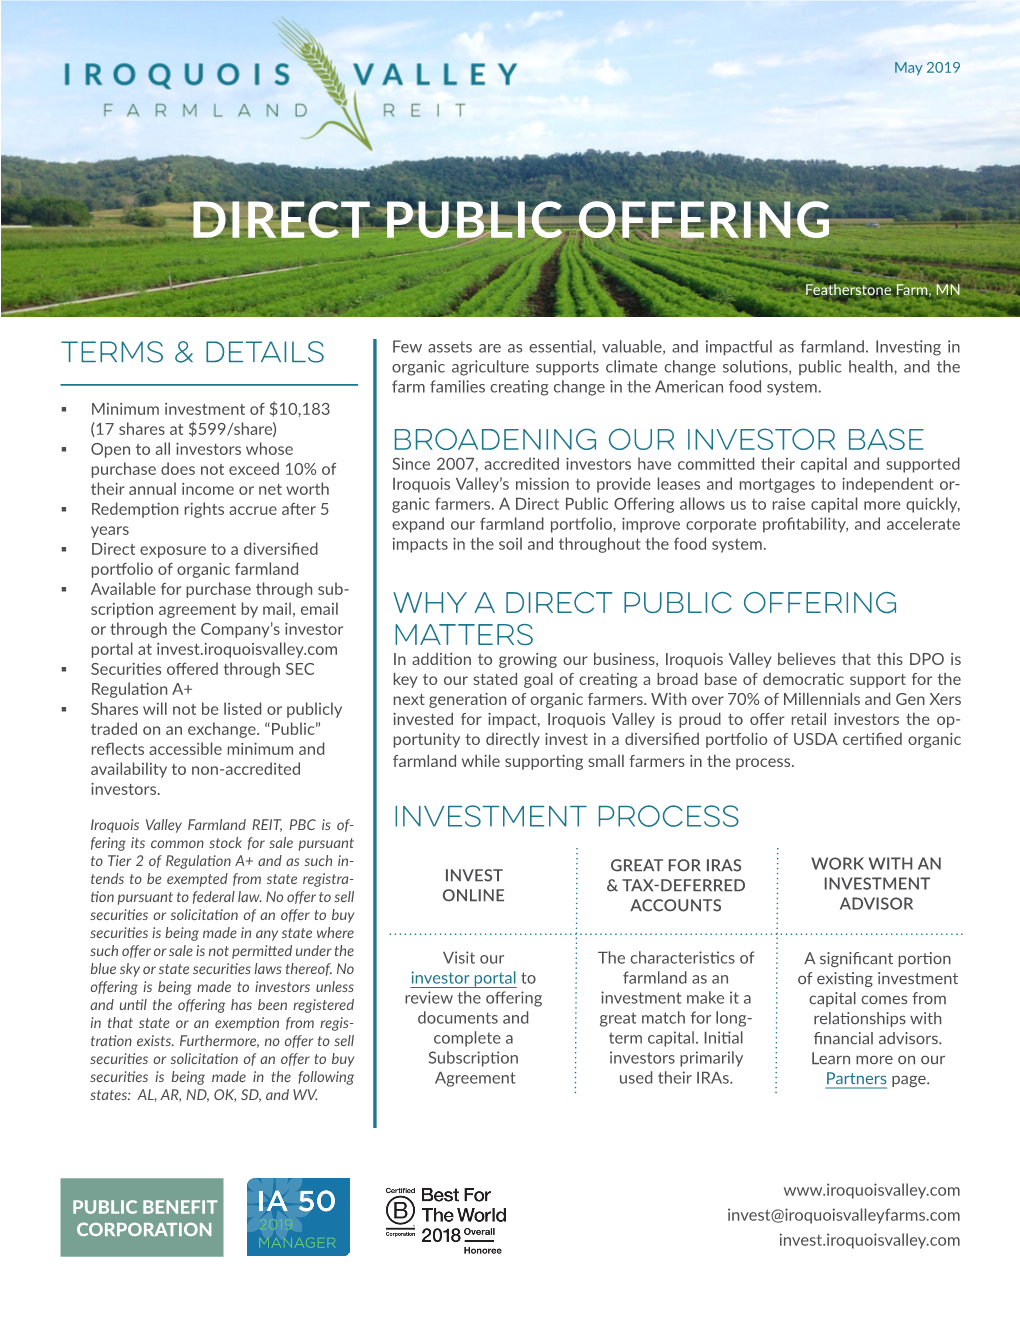 Direct Public Offering